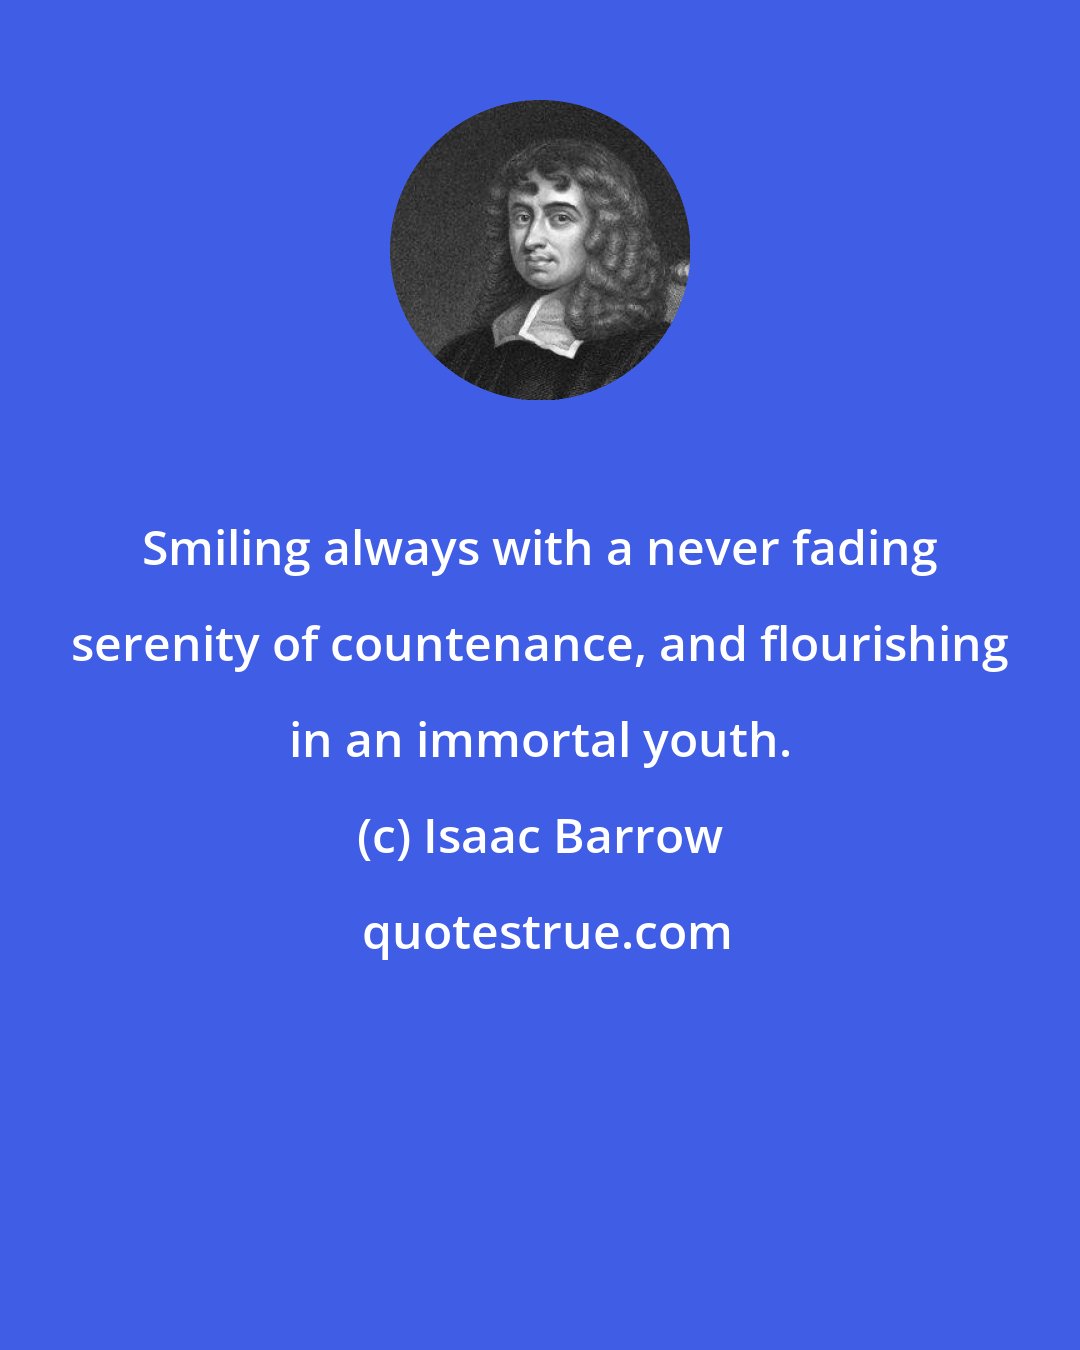 Isaac Barrow: Smiling always with a never fading serenity of countenance, and flourishing in an immortal youth.